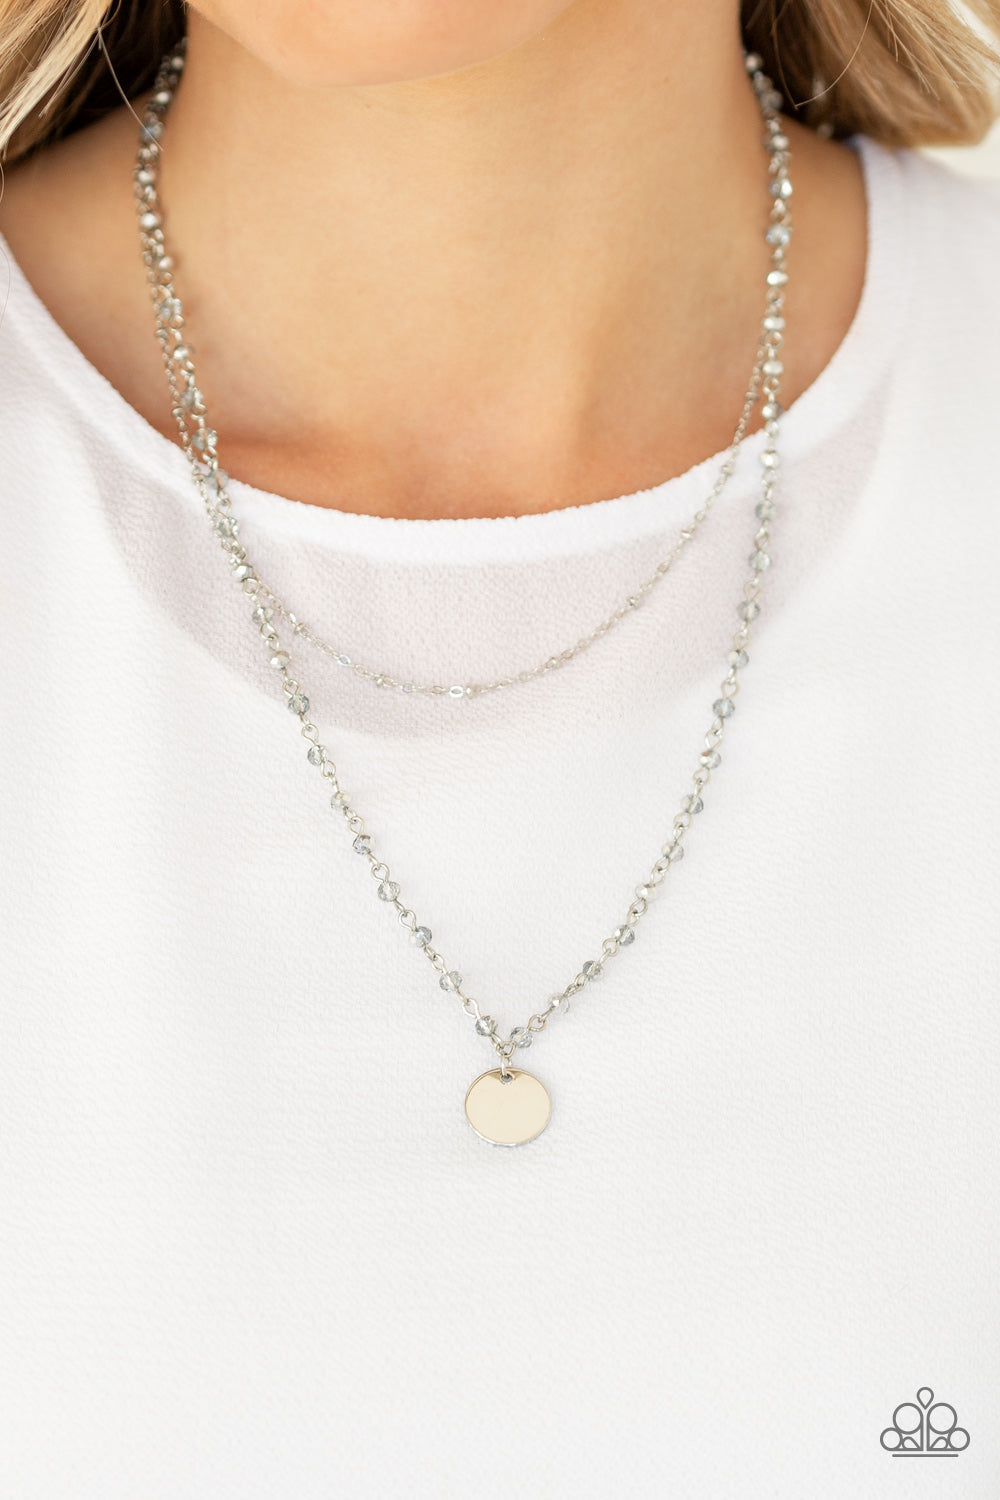 Dainty Demure Silver Necklace